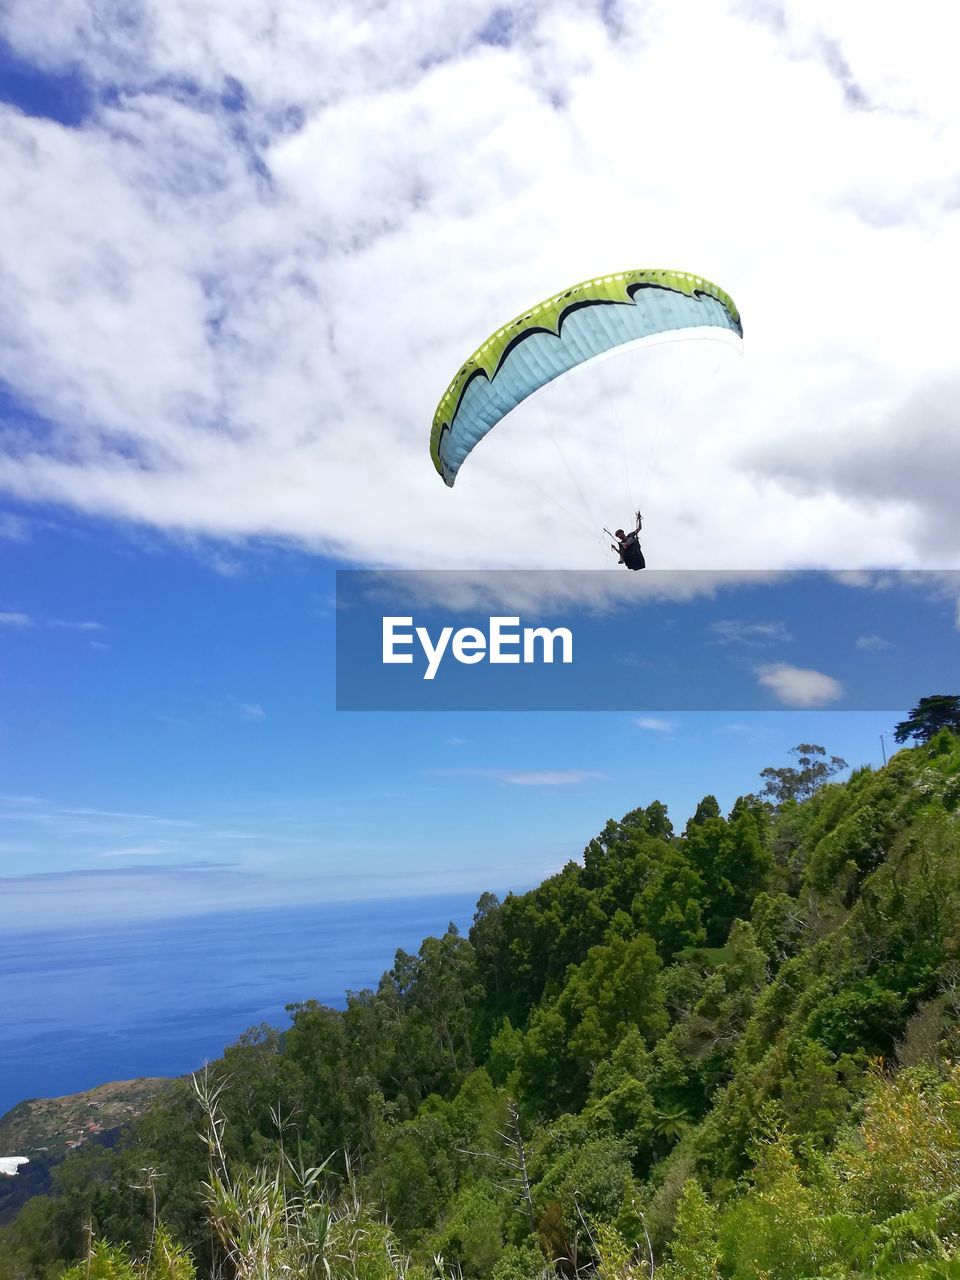 PERSON PARAGLIDING OVER GREEN LANDSCAPE AGAINST SKY